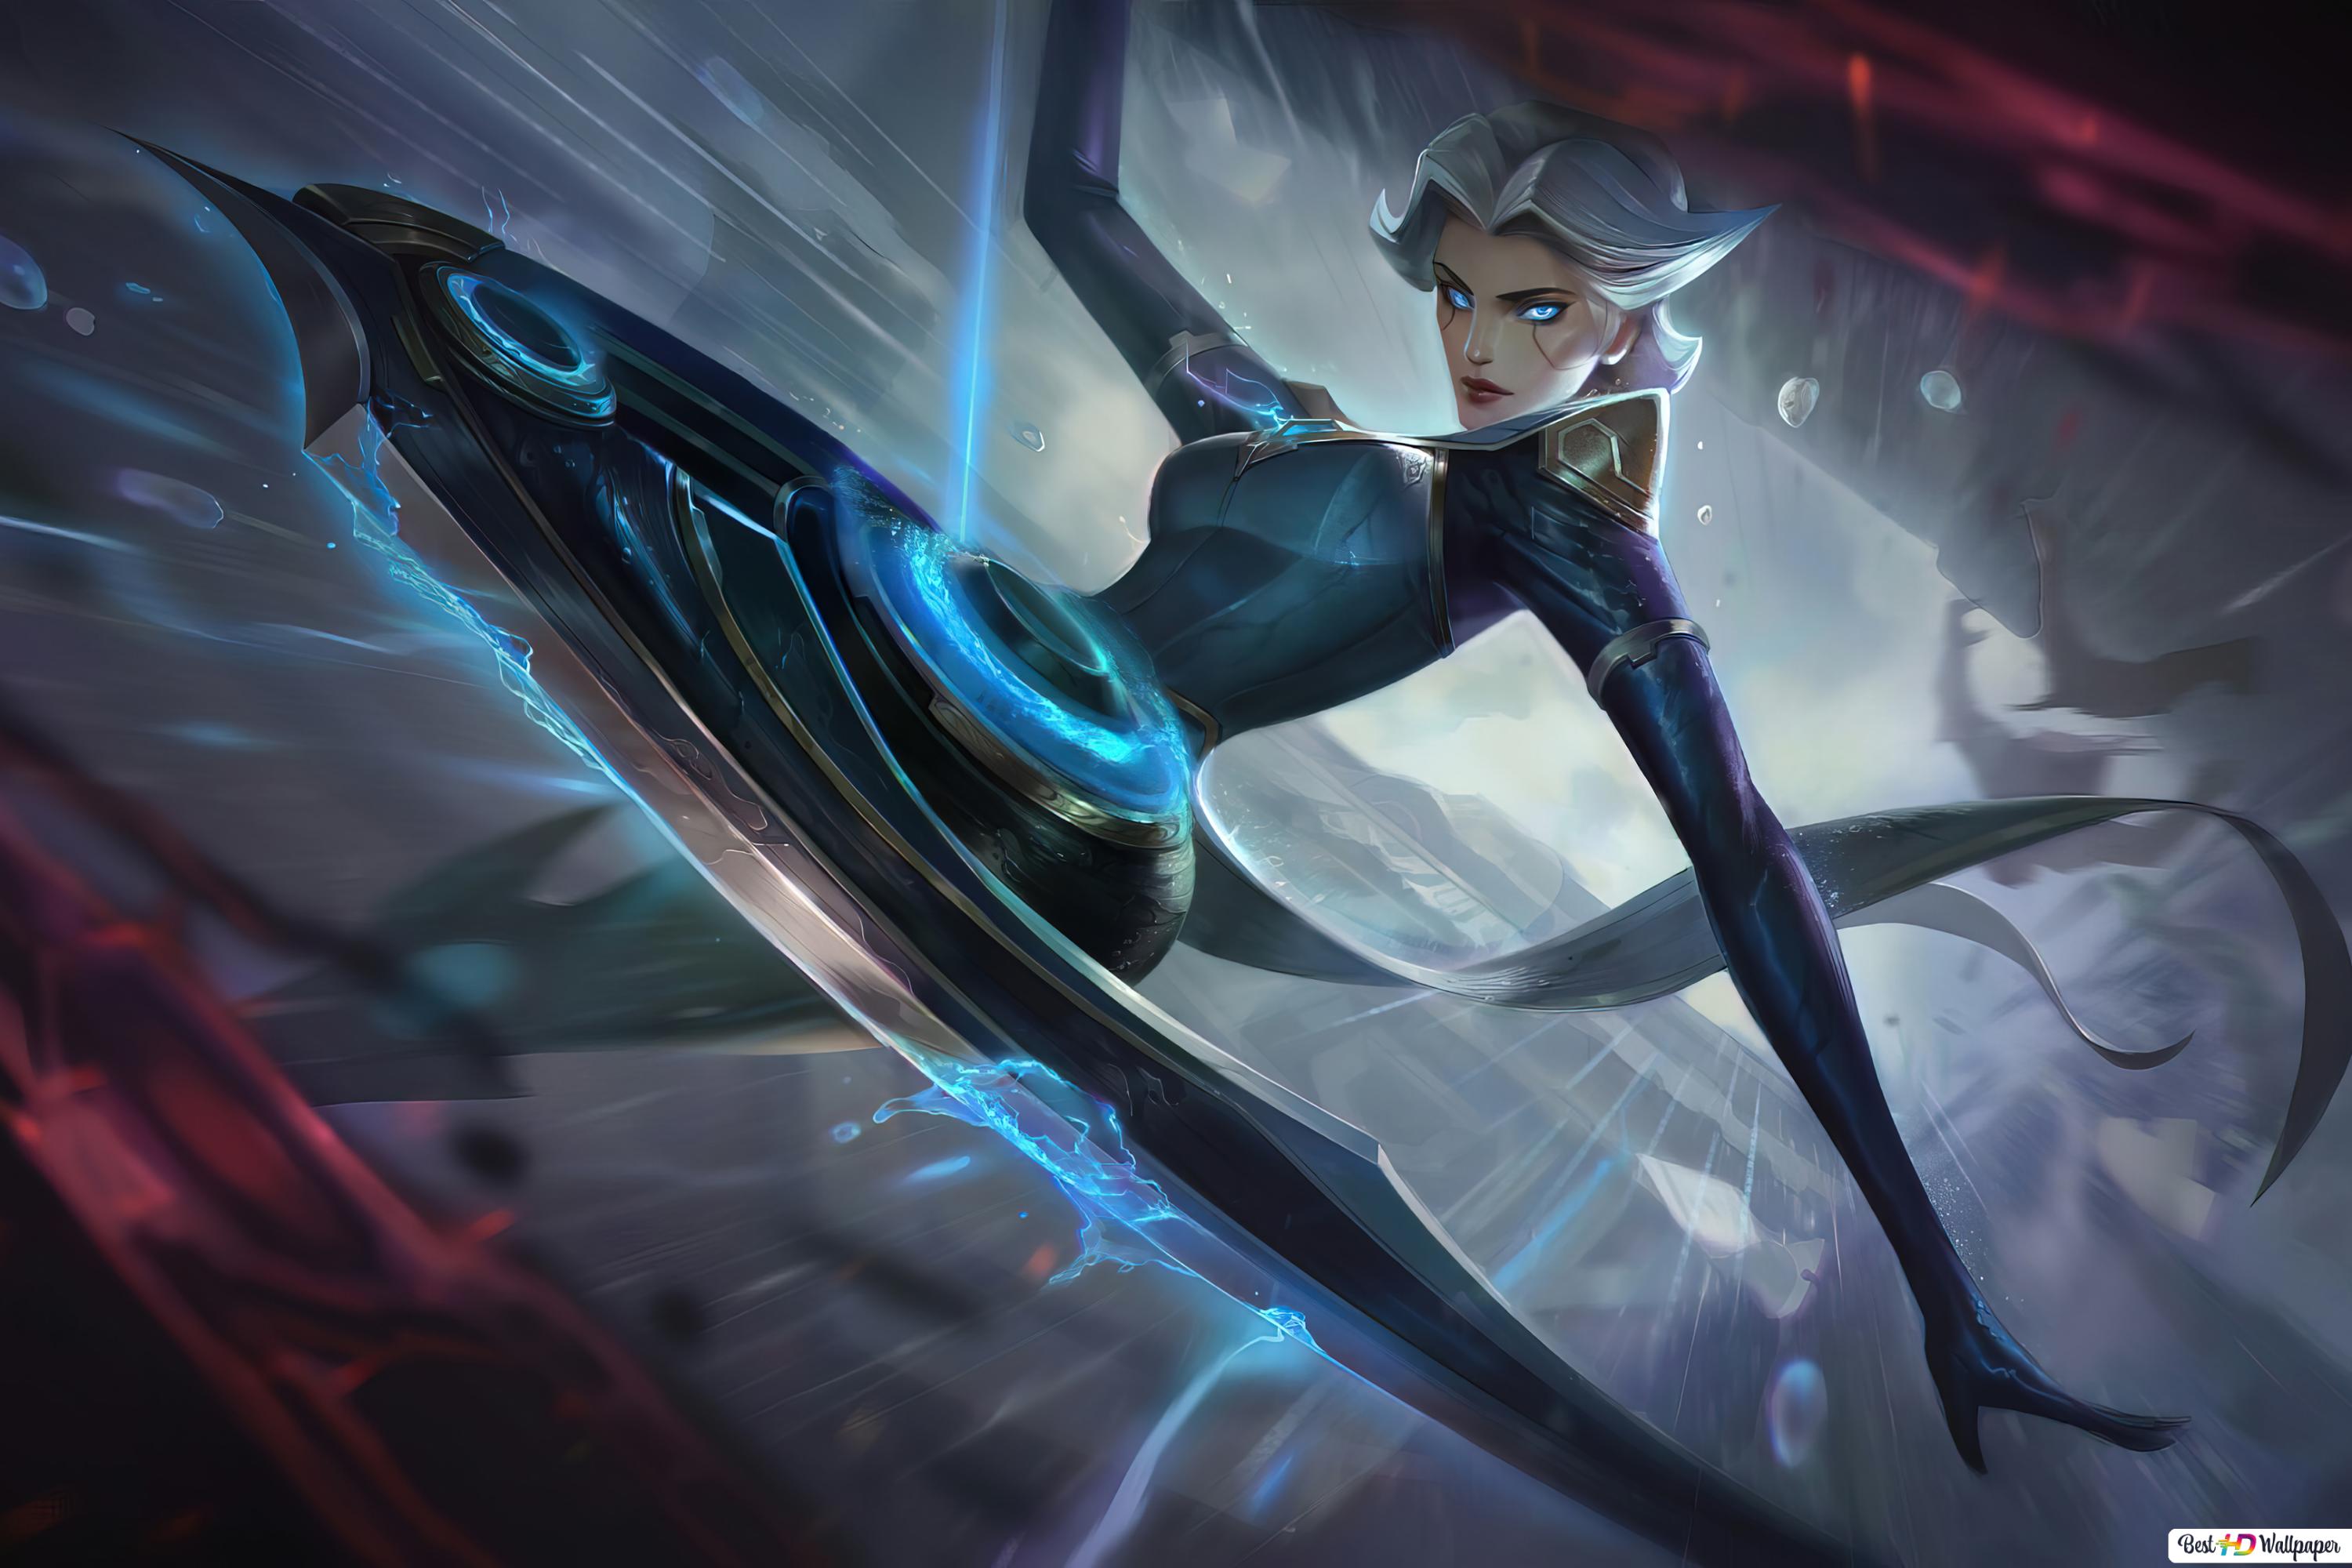 LoL Best Camille Skins Revealed (All Camille Skins Ranked Worst To Best)